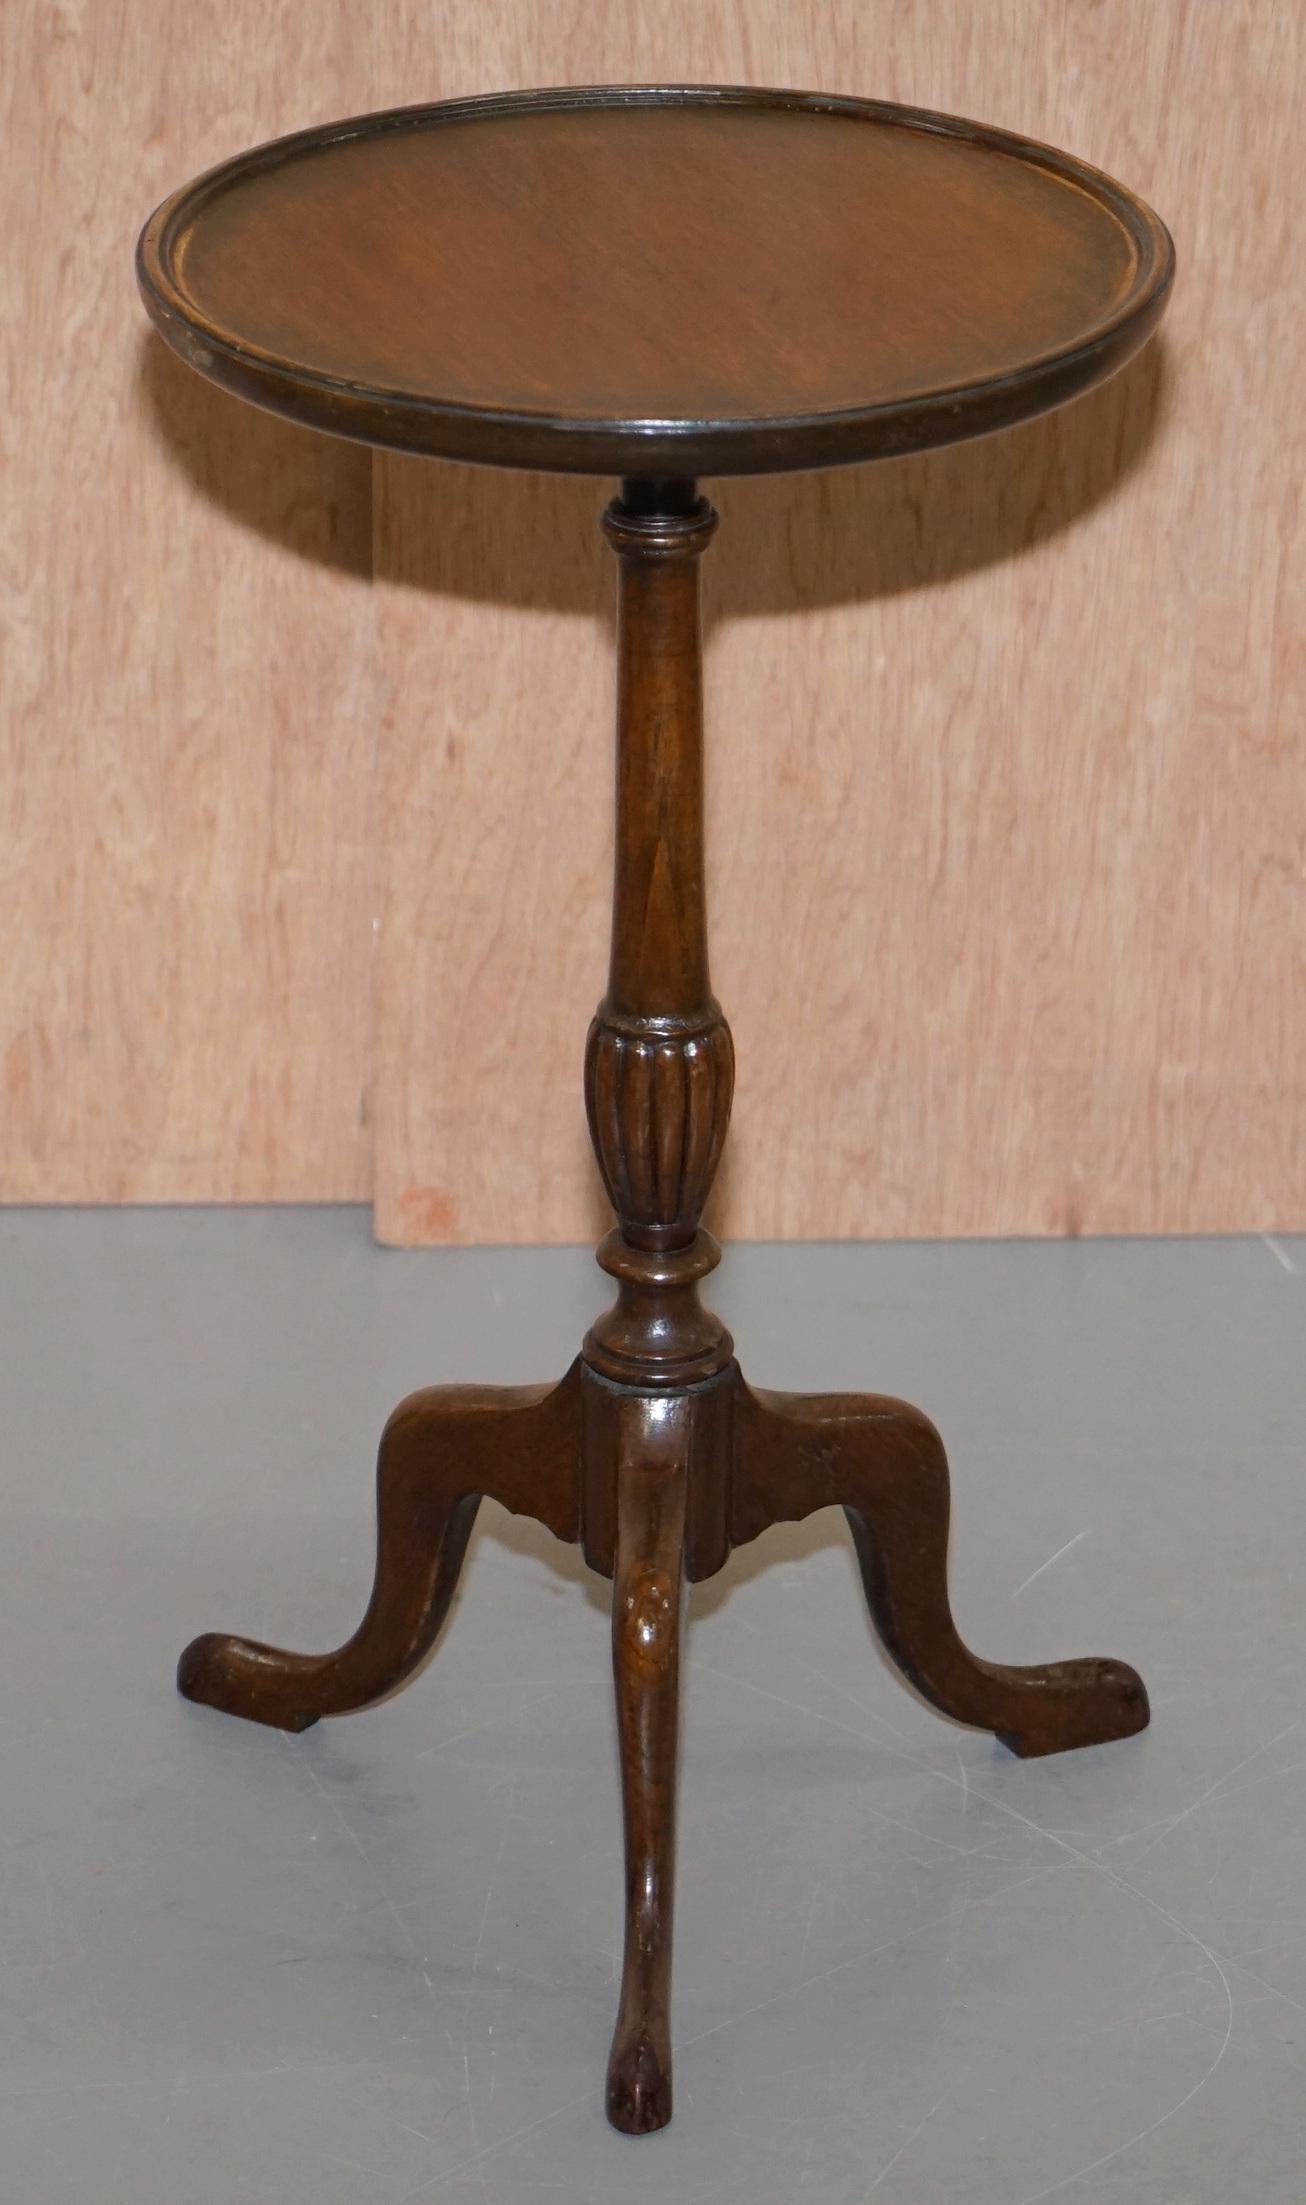 We are delighted to offer for sale this lovely pair of vintage light mahogany lamp or side tables with nicely turned column base.

A good looking well made tripod pair in good condition throughout, we have cleaned waxed and polished them from top